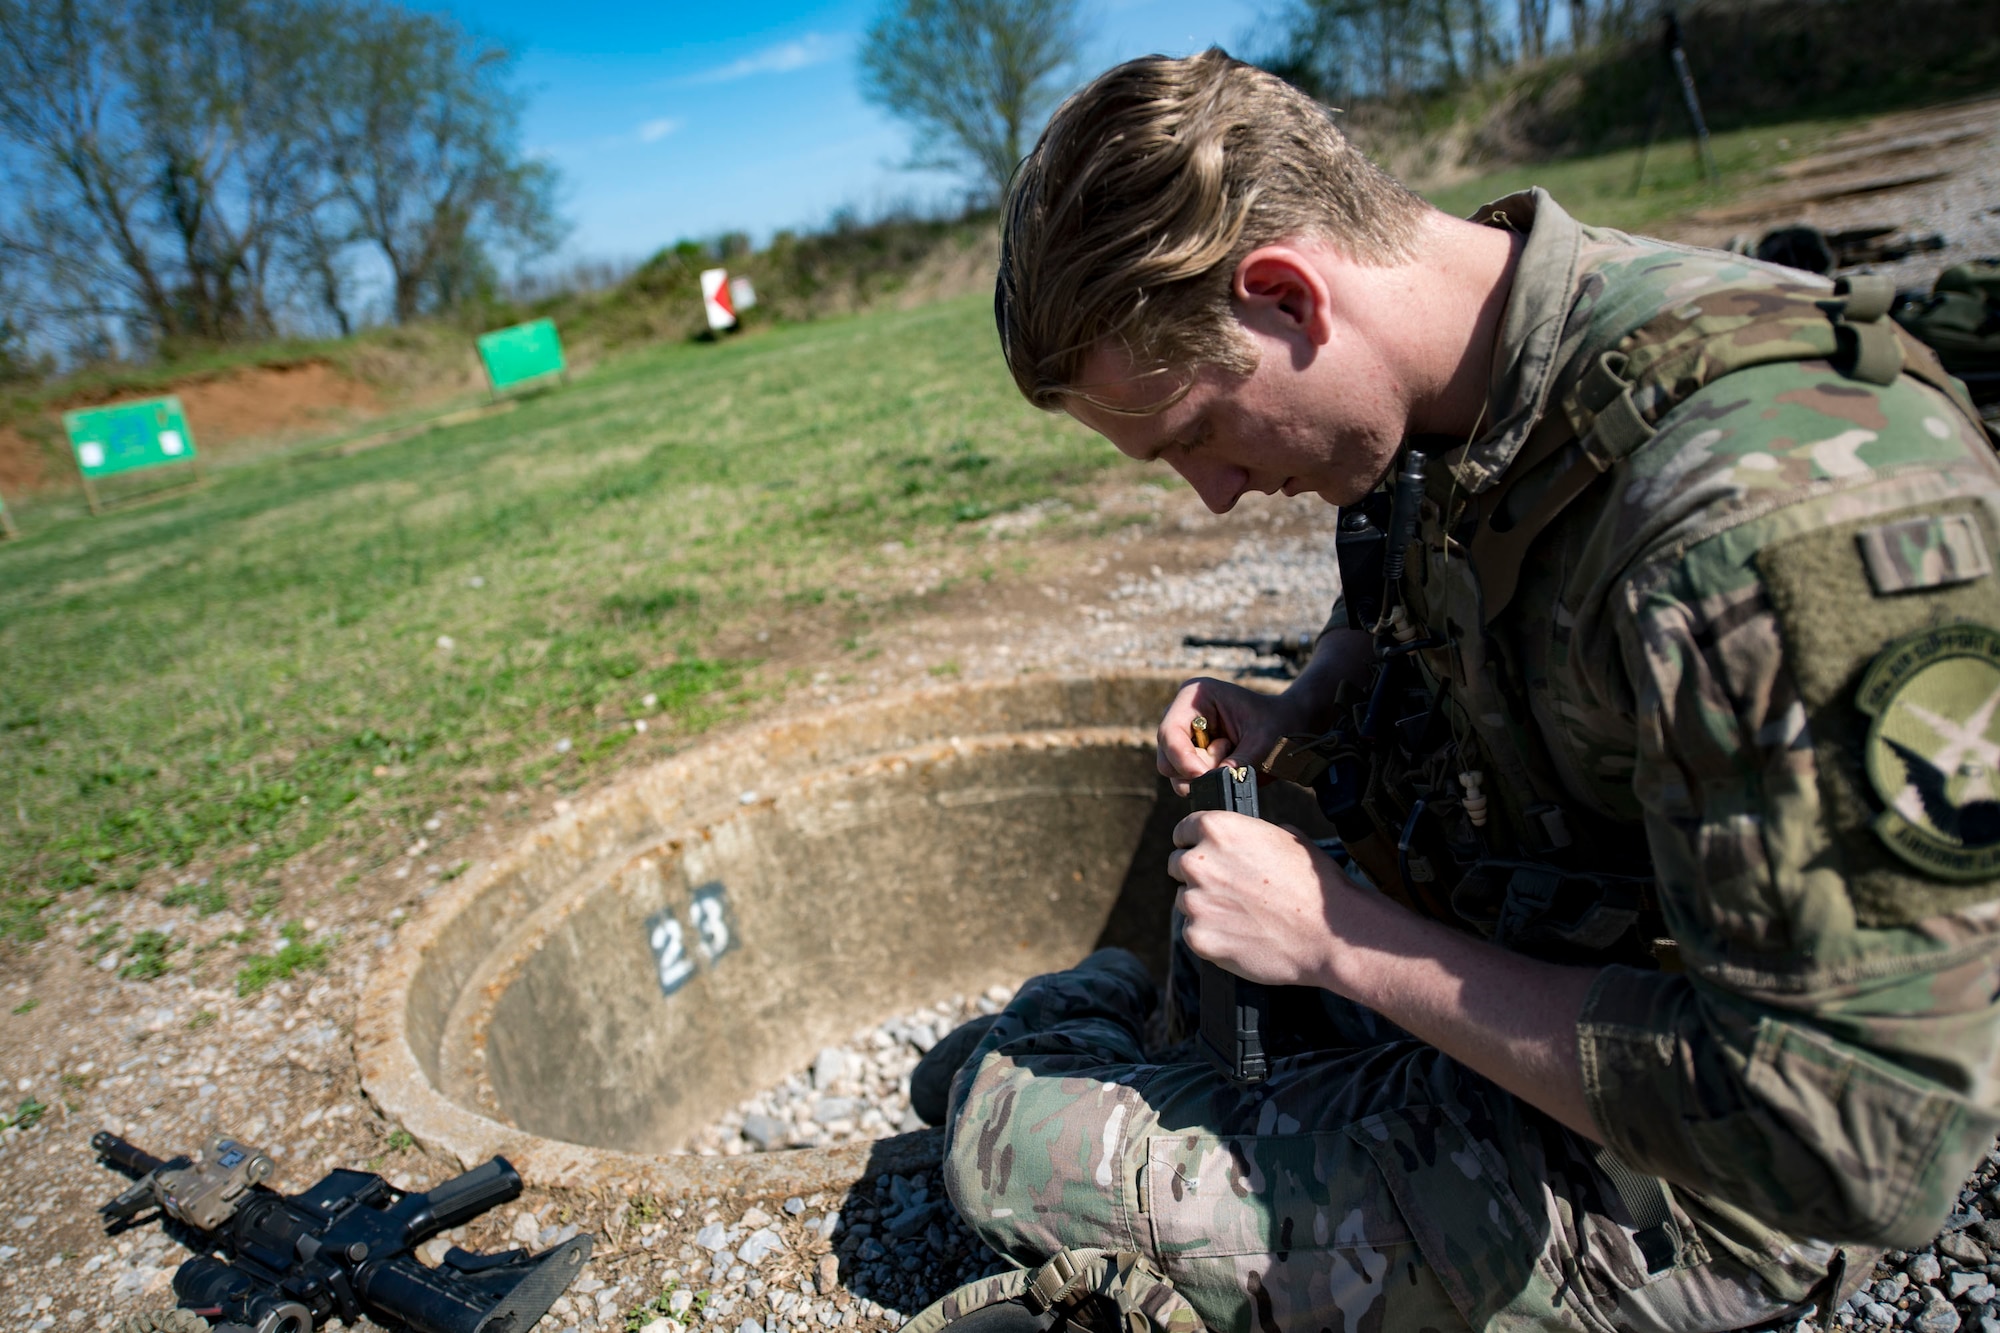 U.S. Air Force Senior Airman Brandon Malinowski, 19th Air Support Operations Squadron Tactical Air Control Party specialist loads ammo before attempting a German armed forces proficiency badge assessment, April 4, 2017, at Fort Campbell, Ky. To enhance their ability to work together in deployed locations, members of the German Air Force travelled to Fort Campbell to train and exercise with the 19th ASOS. While at Fort Campbell, The German Air Force members hosted a German armed forces proficiency assessment for Airmen consisting of shooting firearms, swimming, agility exercises and a rucksack march.